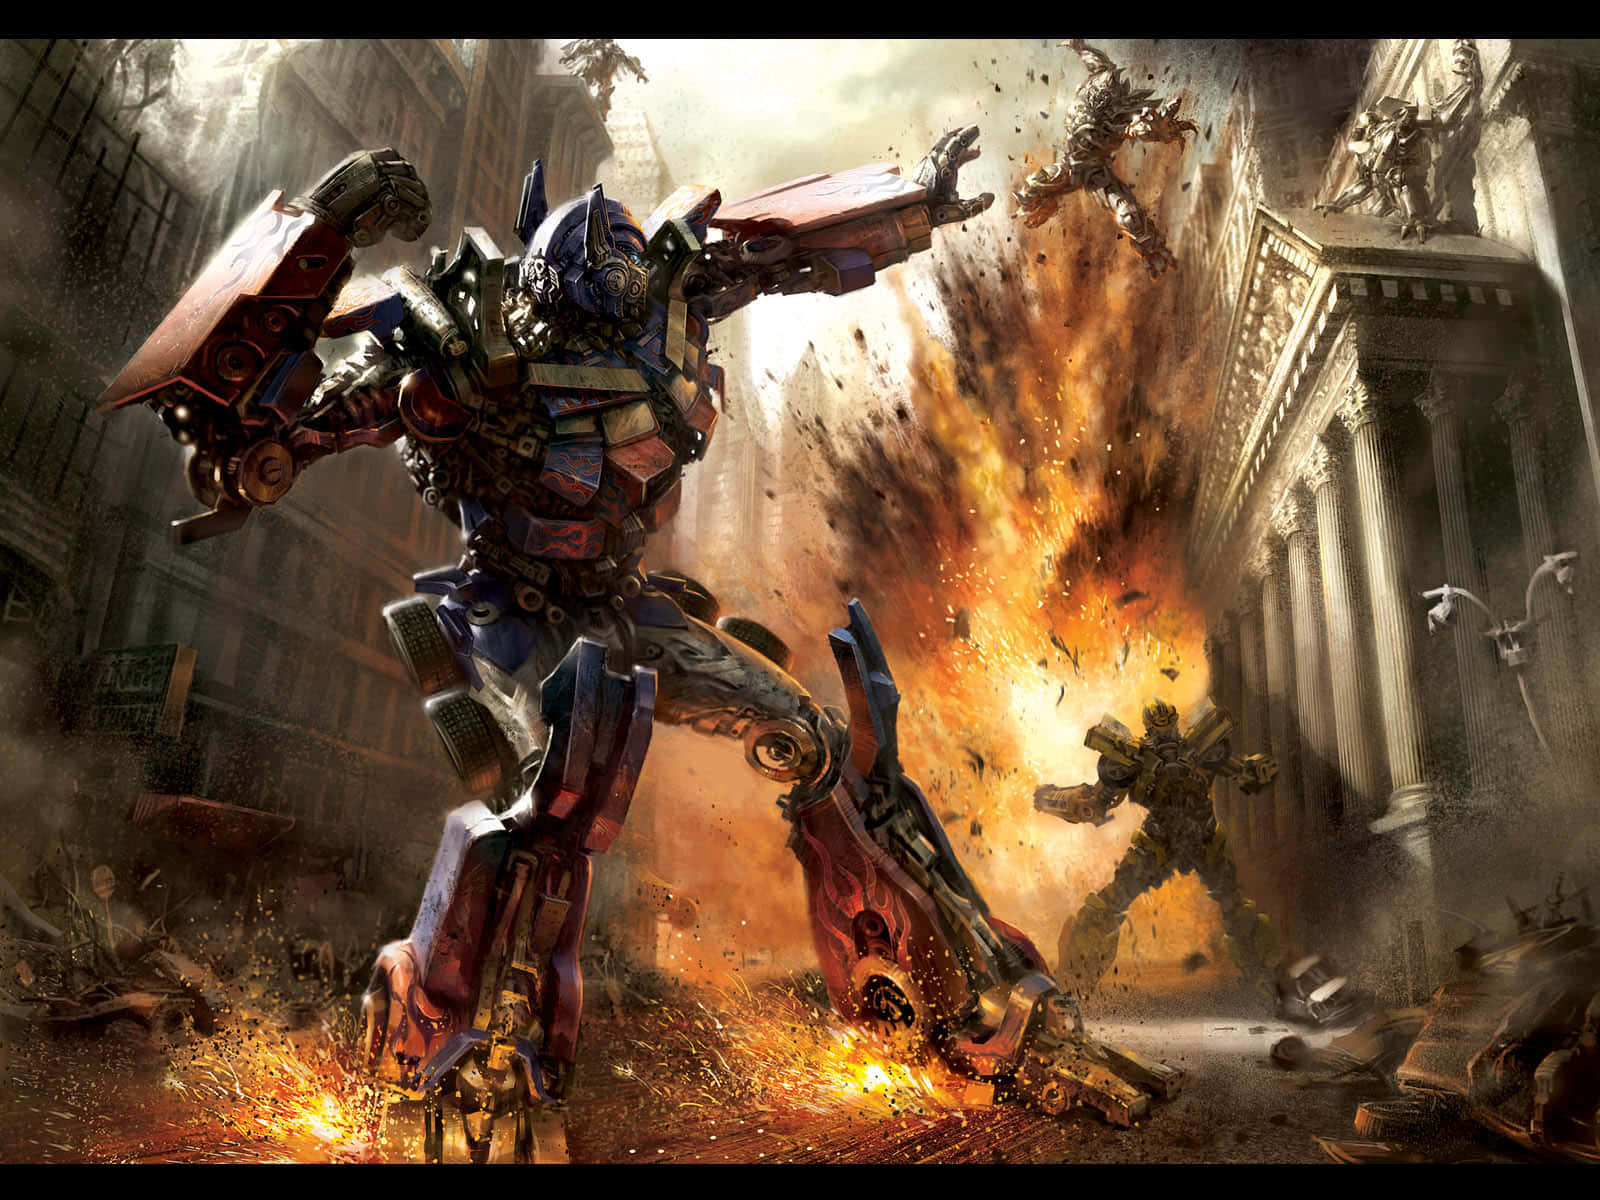 An Autobot taking on Decepticons in the middle of a city